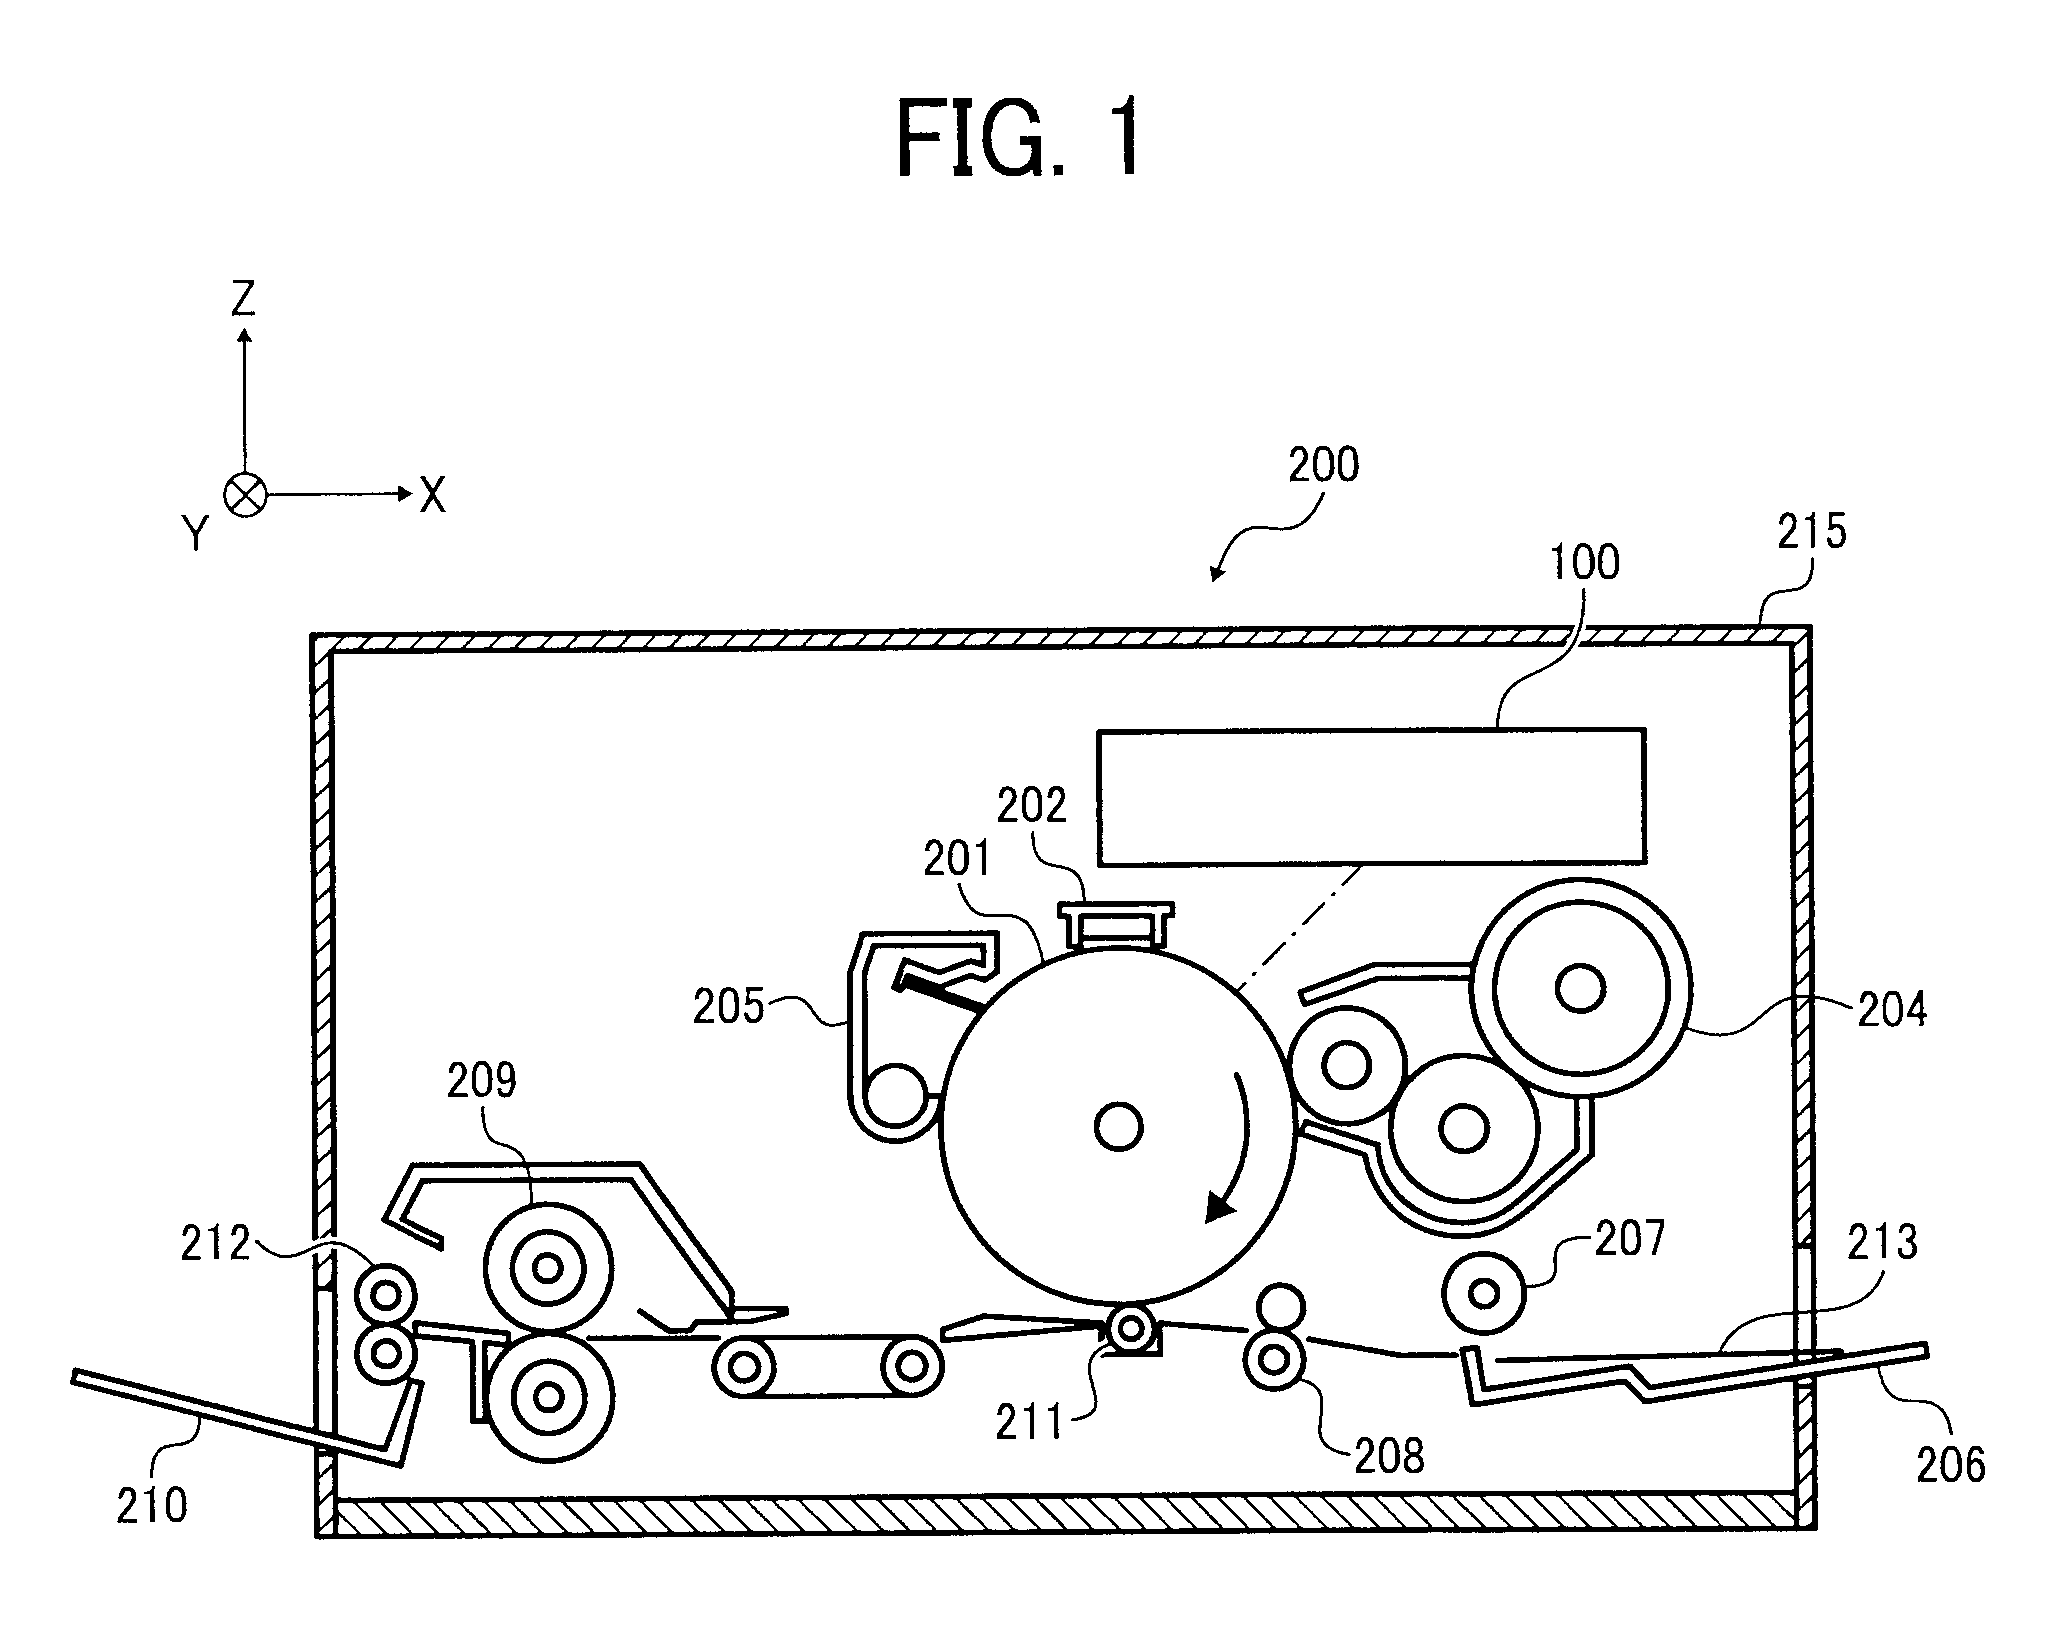 Optical scan apparatus and image formation apparatus